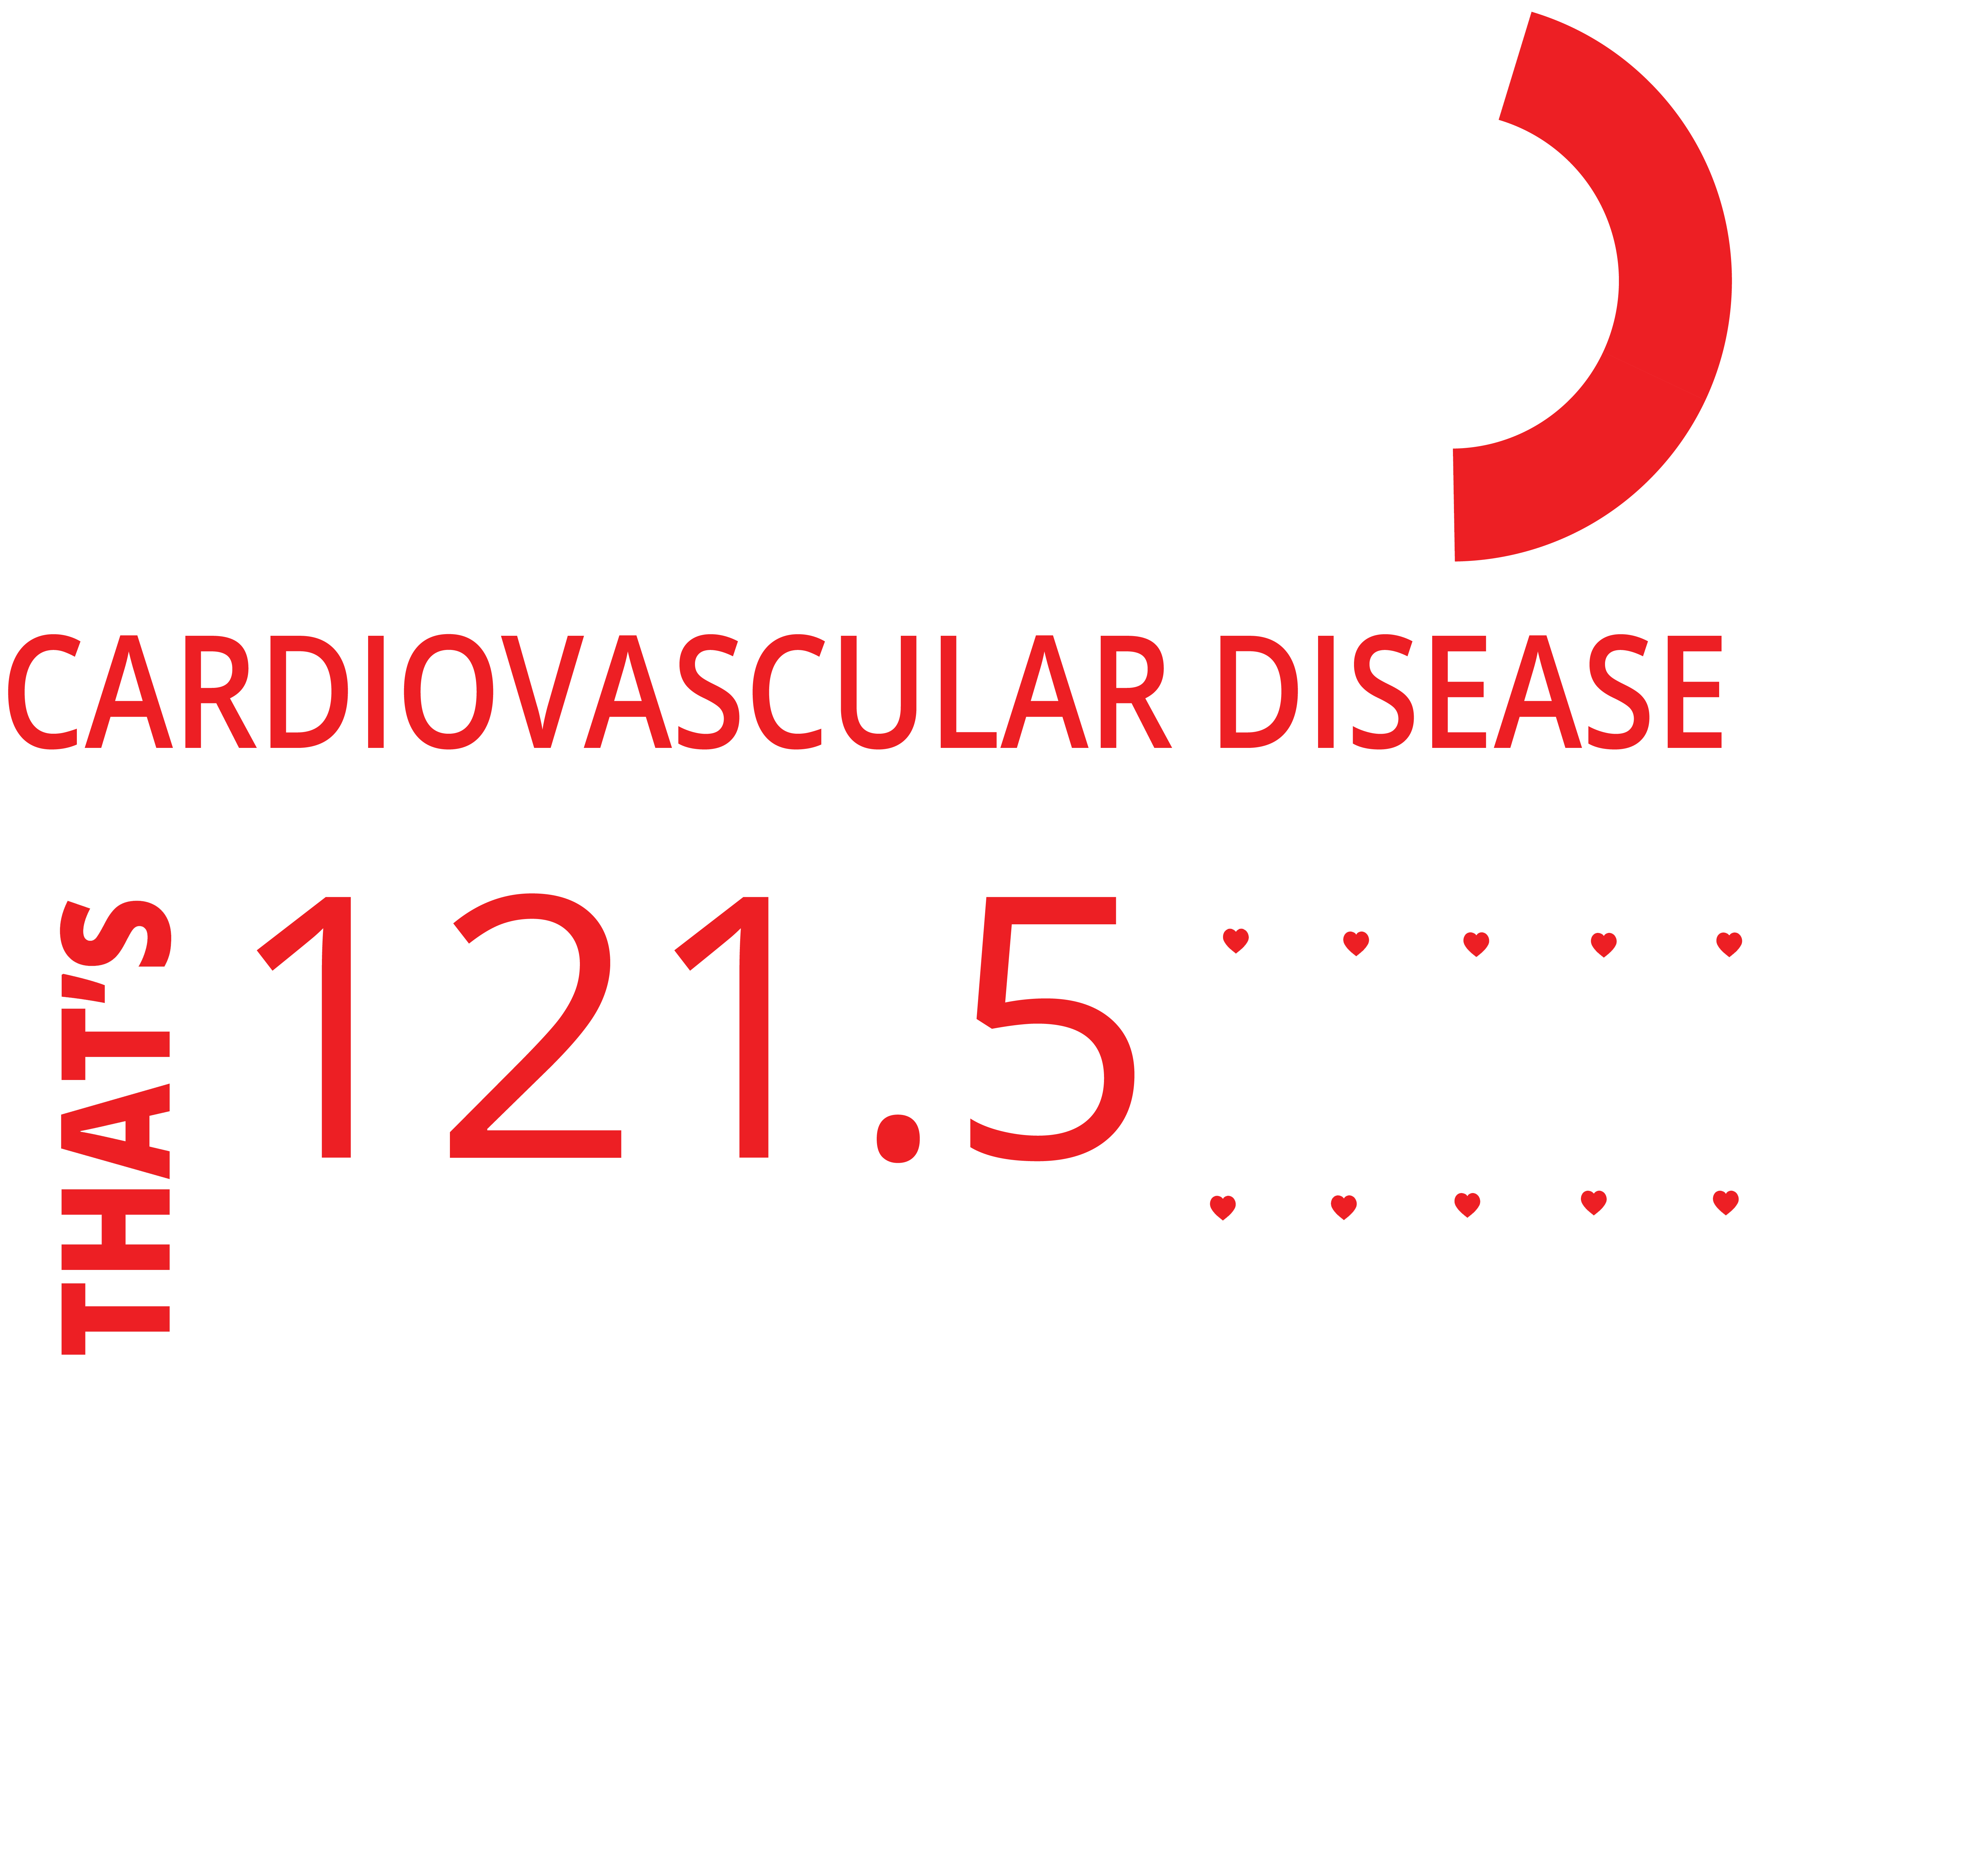 Text About Cardiovascular Disease